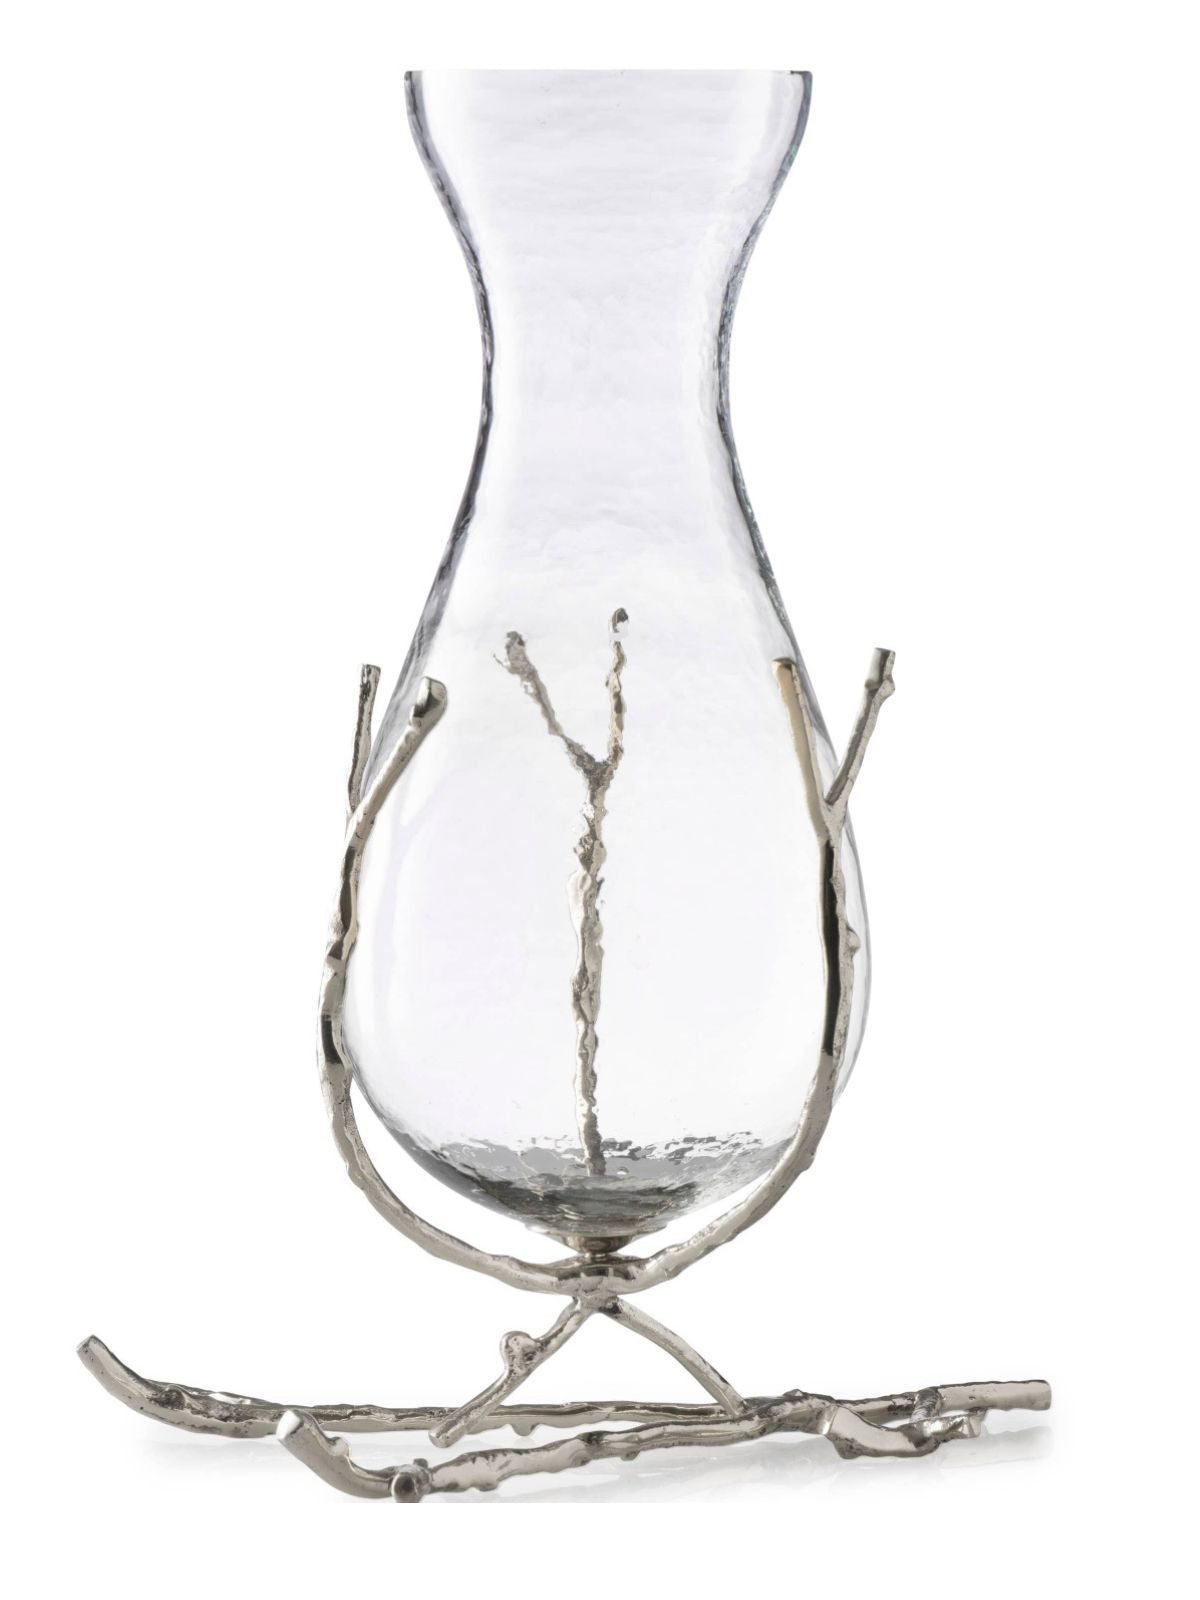 16H Luxury Glass Vase with glossy silver twigs - KYA Home Decor.